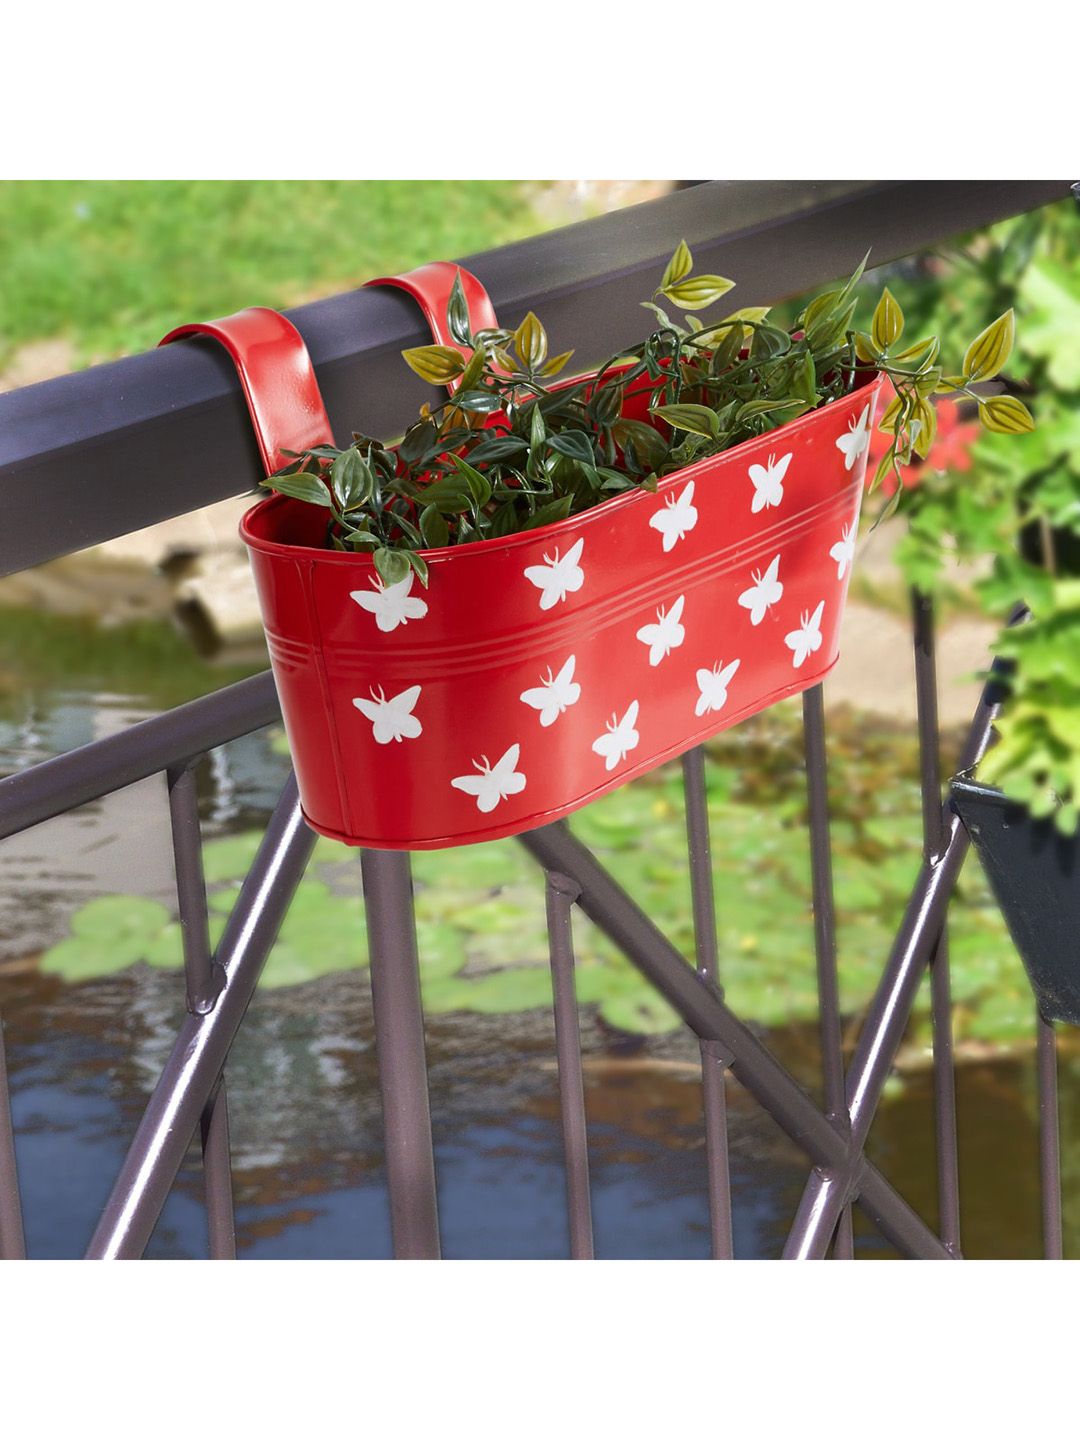 Home Centre Red Eden Printed Butterfly Corsica Metal Hanging Planter Price in India